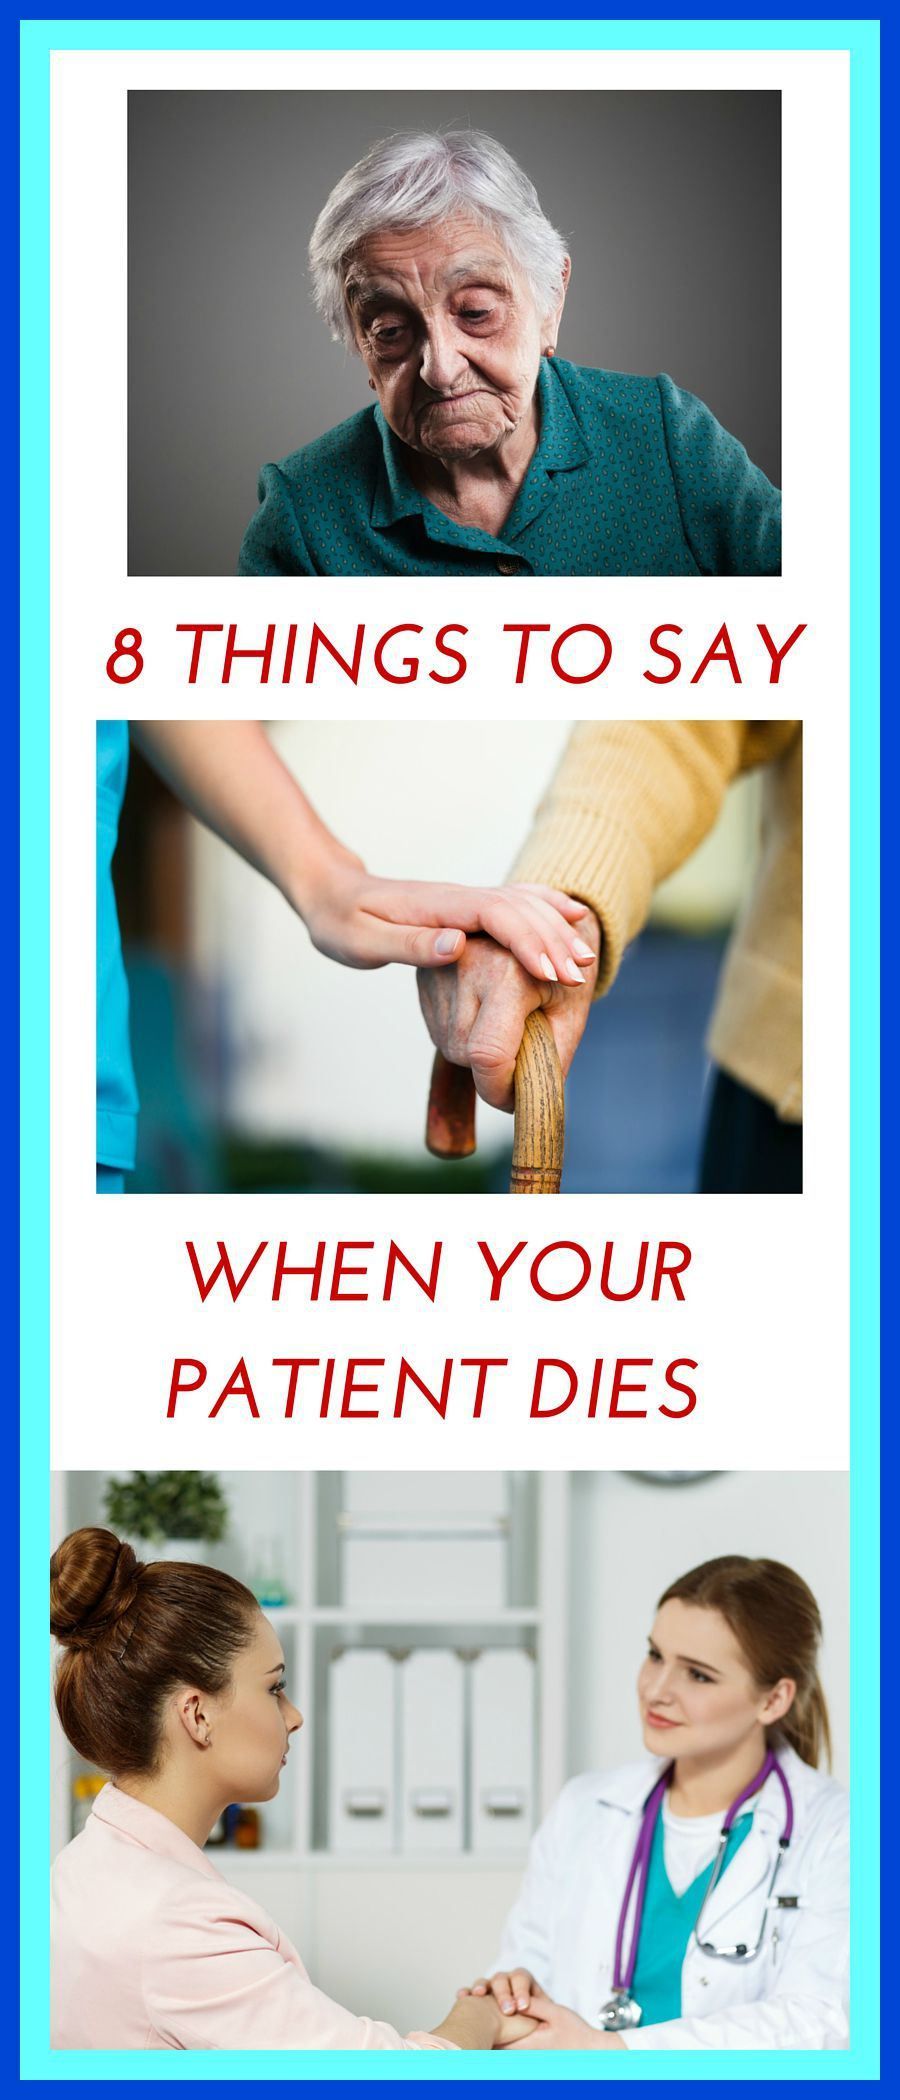 8 Things to Say to the Family When Your Patient Dies